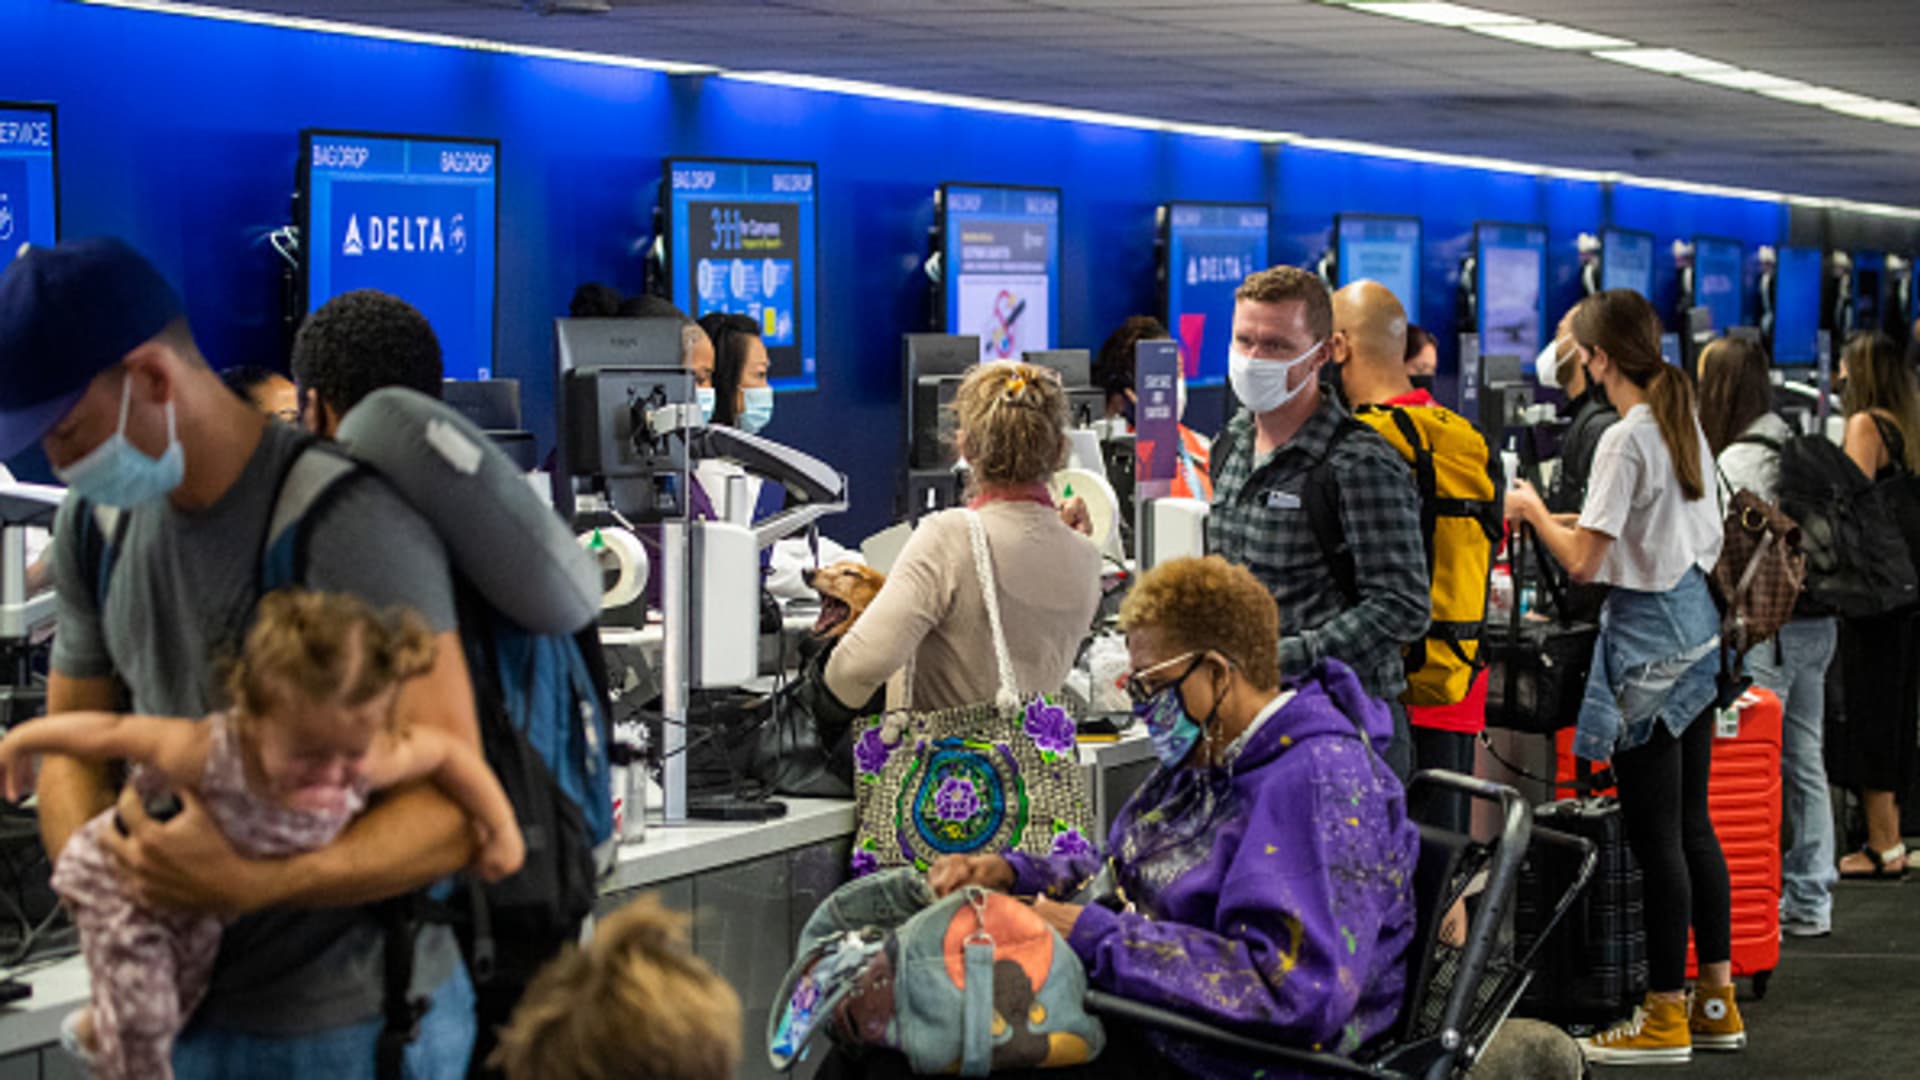 A crowd of travelers check in for their flights at LAX on Friday, May 28, 2021.